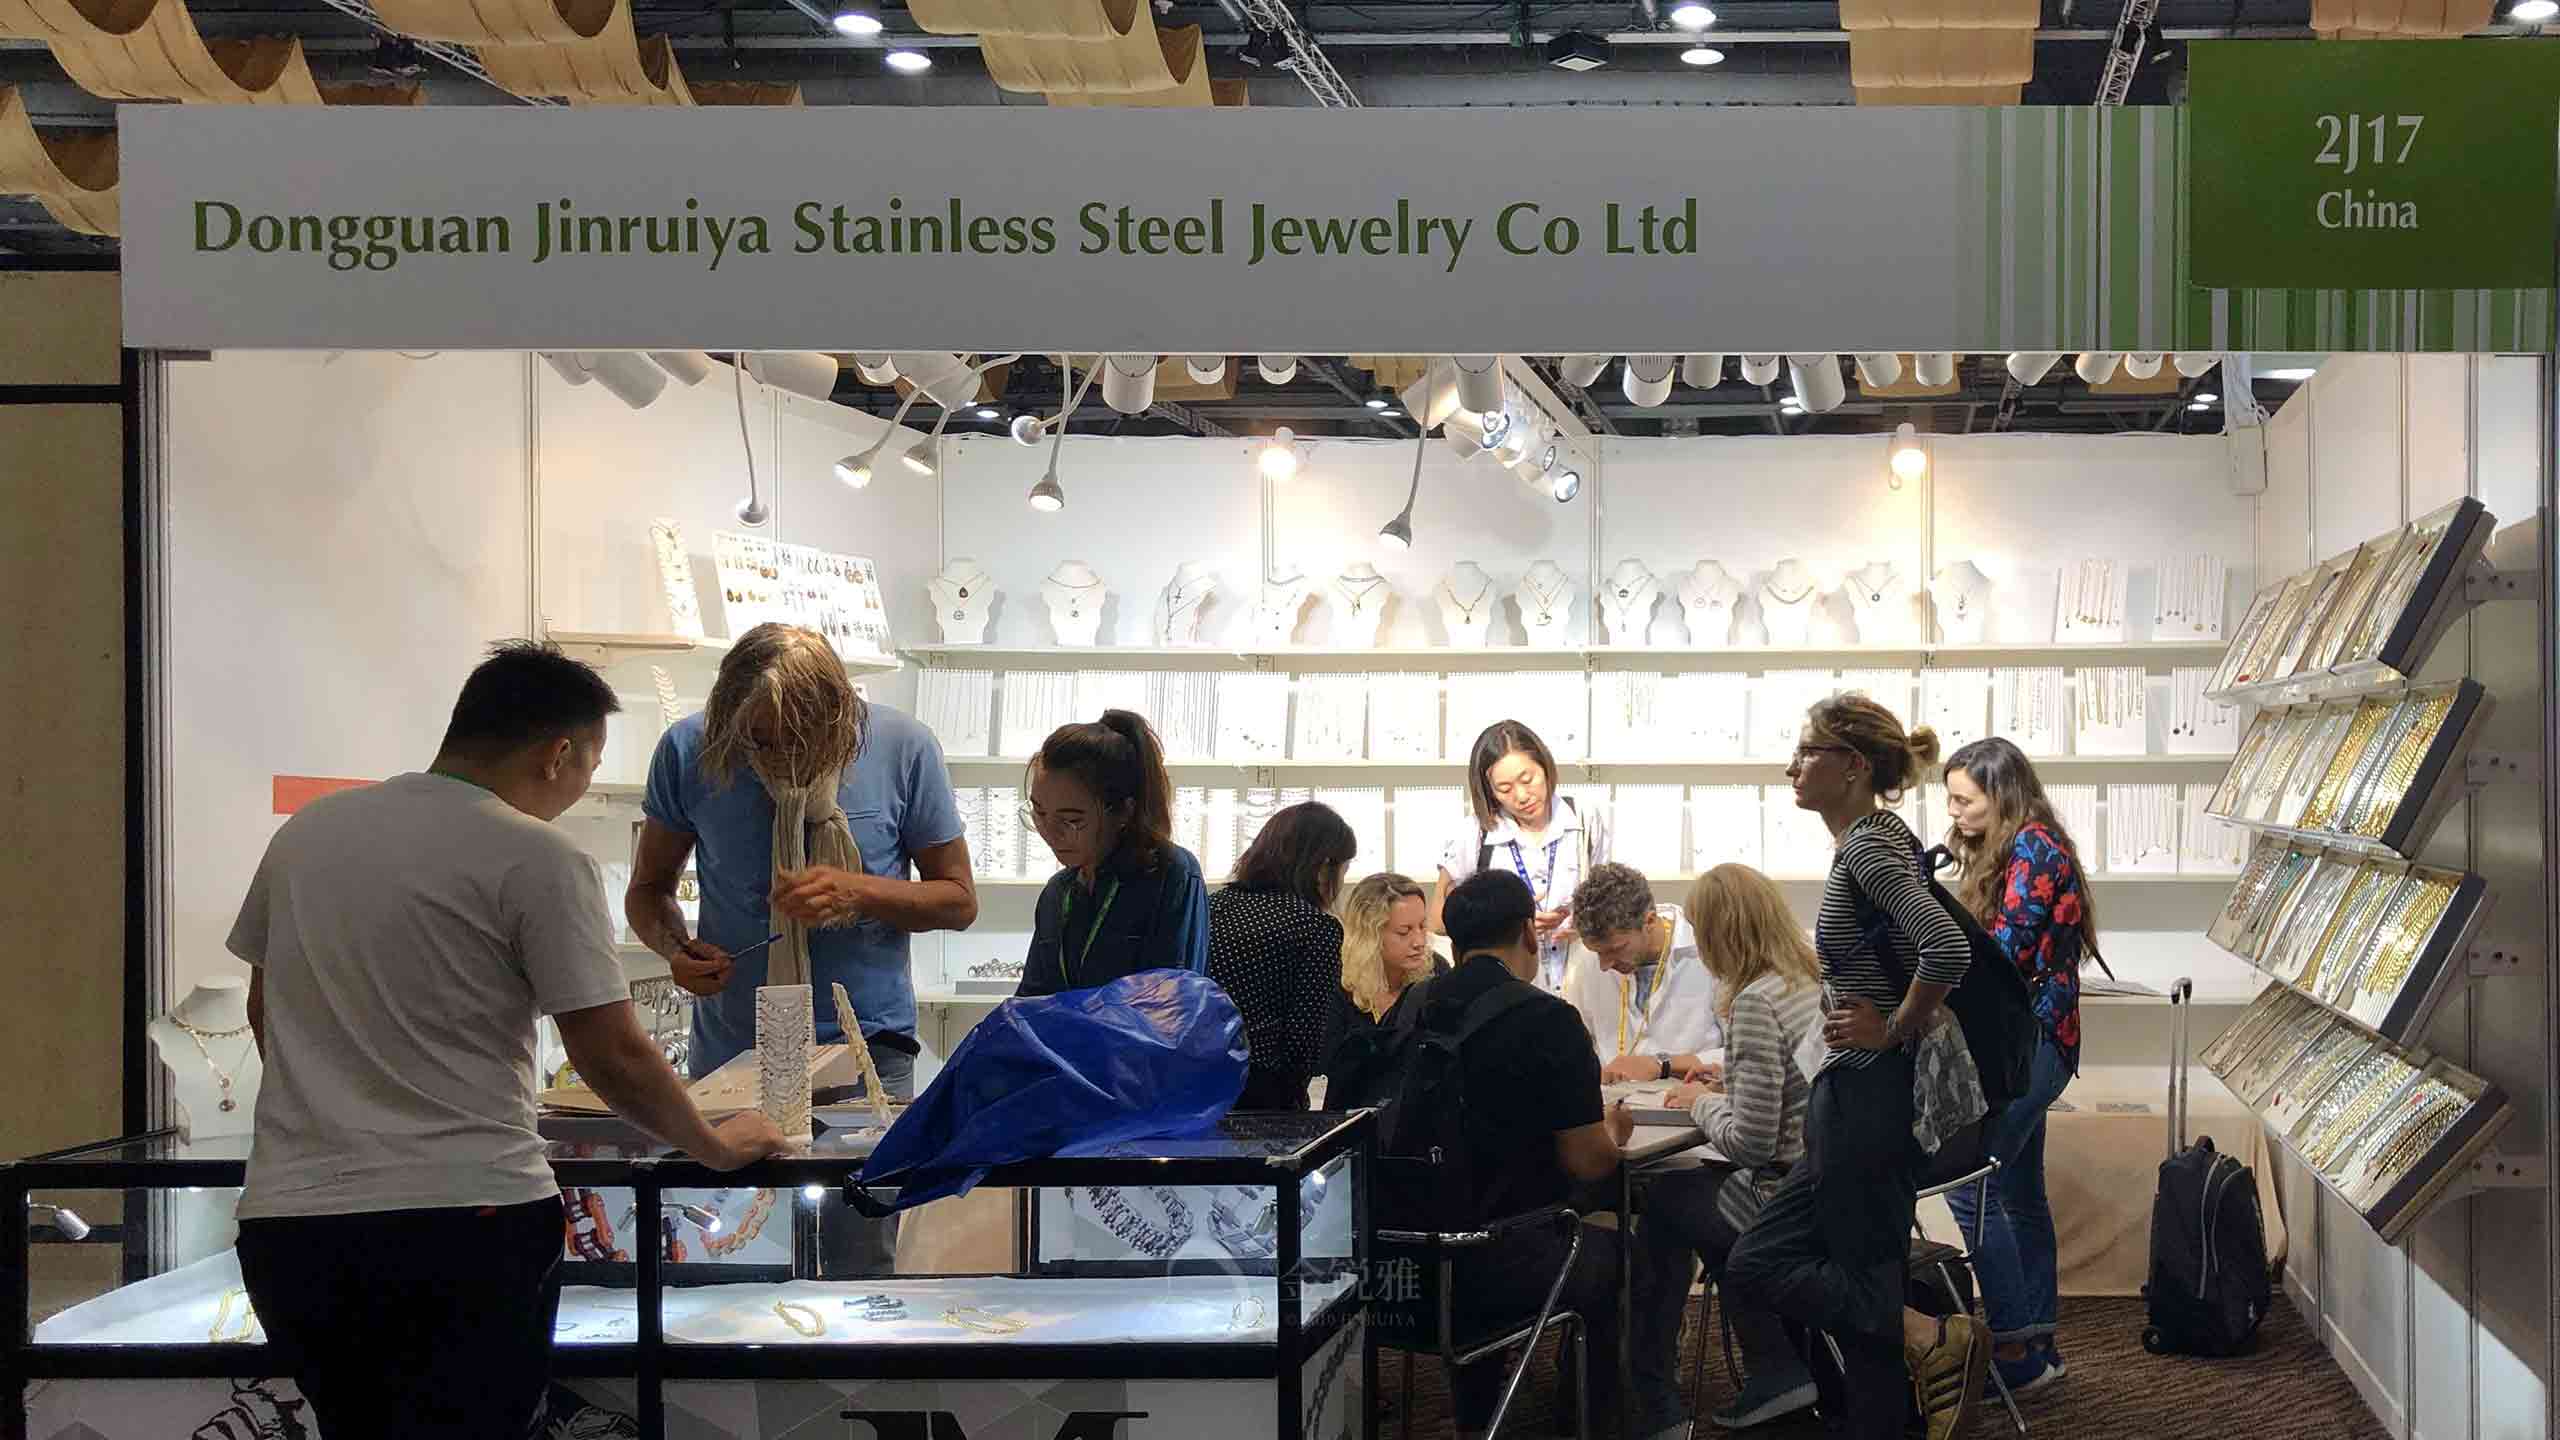 We are at the JGW (jewellery & GEM world hong kong) exhibition